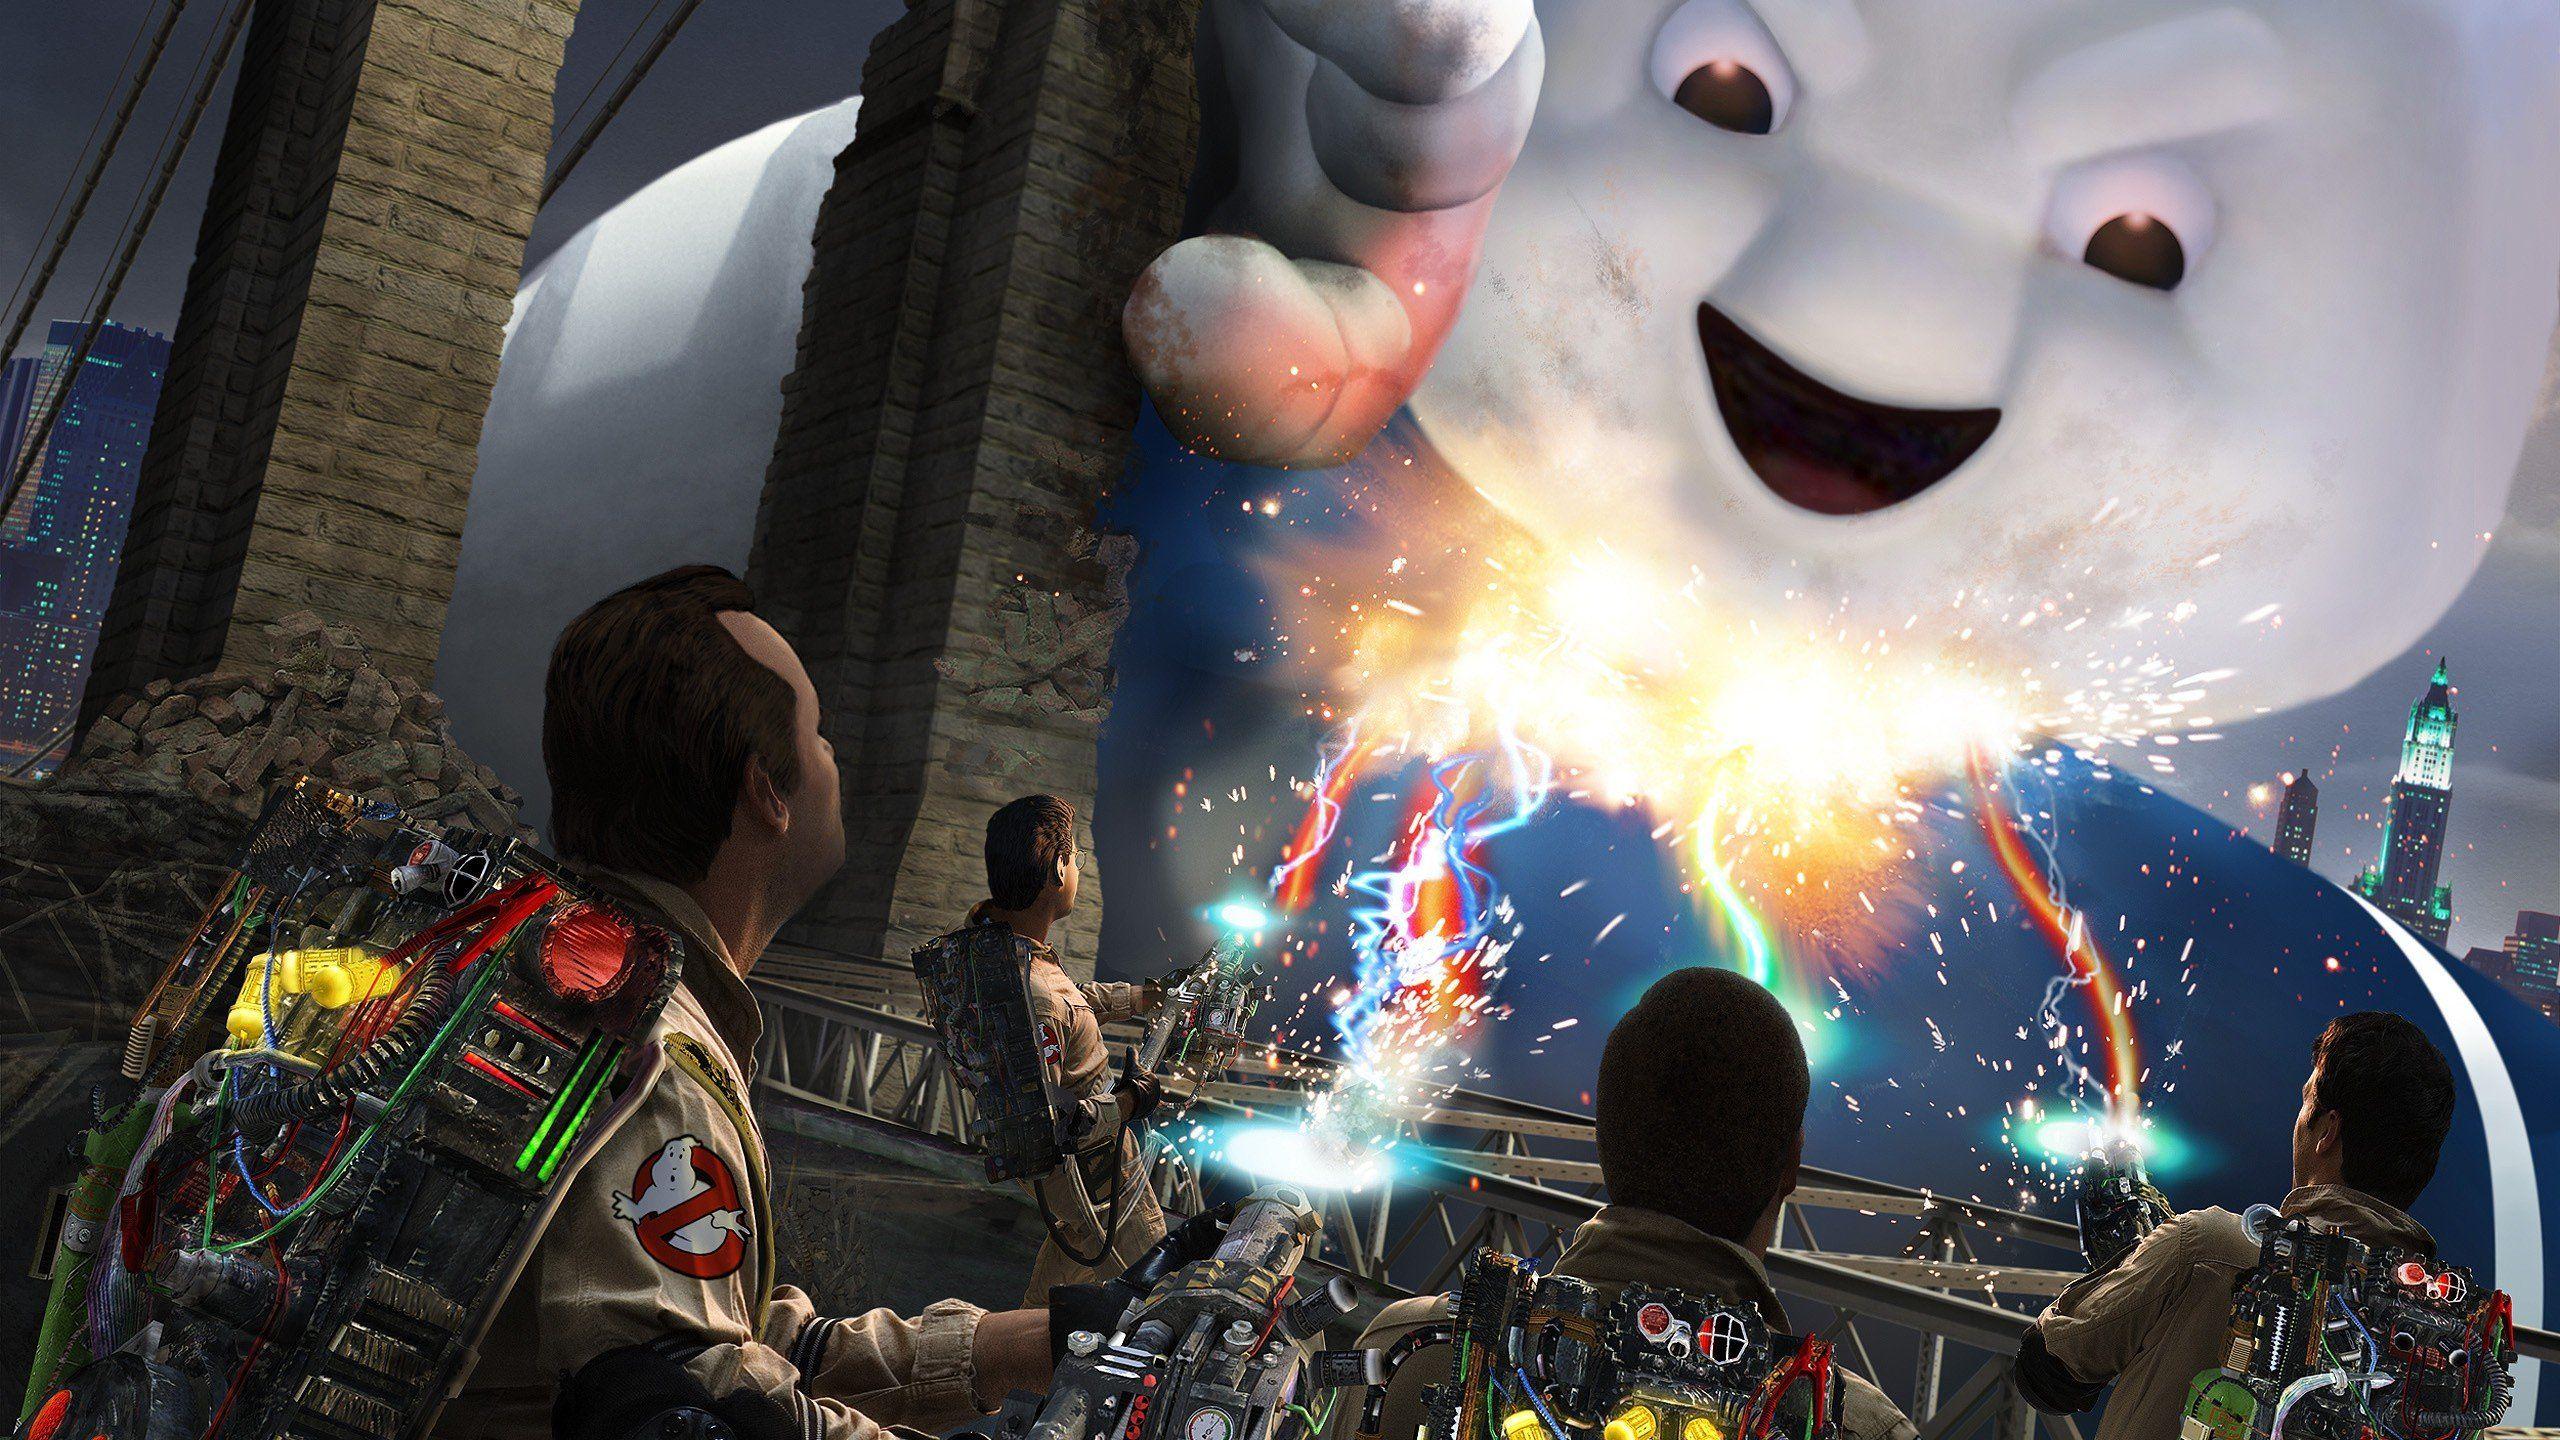 Stay Puft Marshmallow Man, Ghostbusters, Video games HD Wallpaper